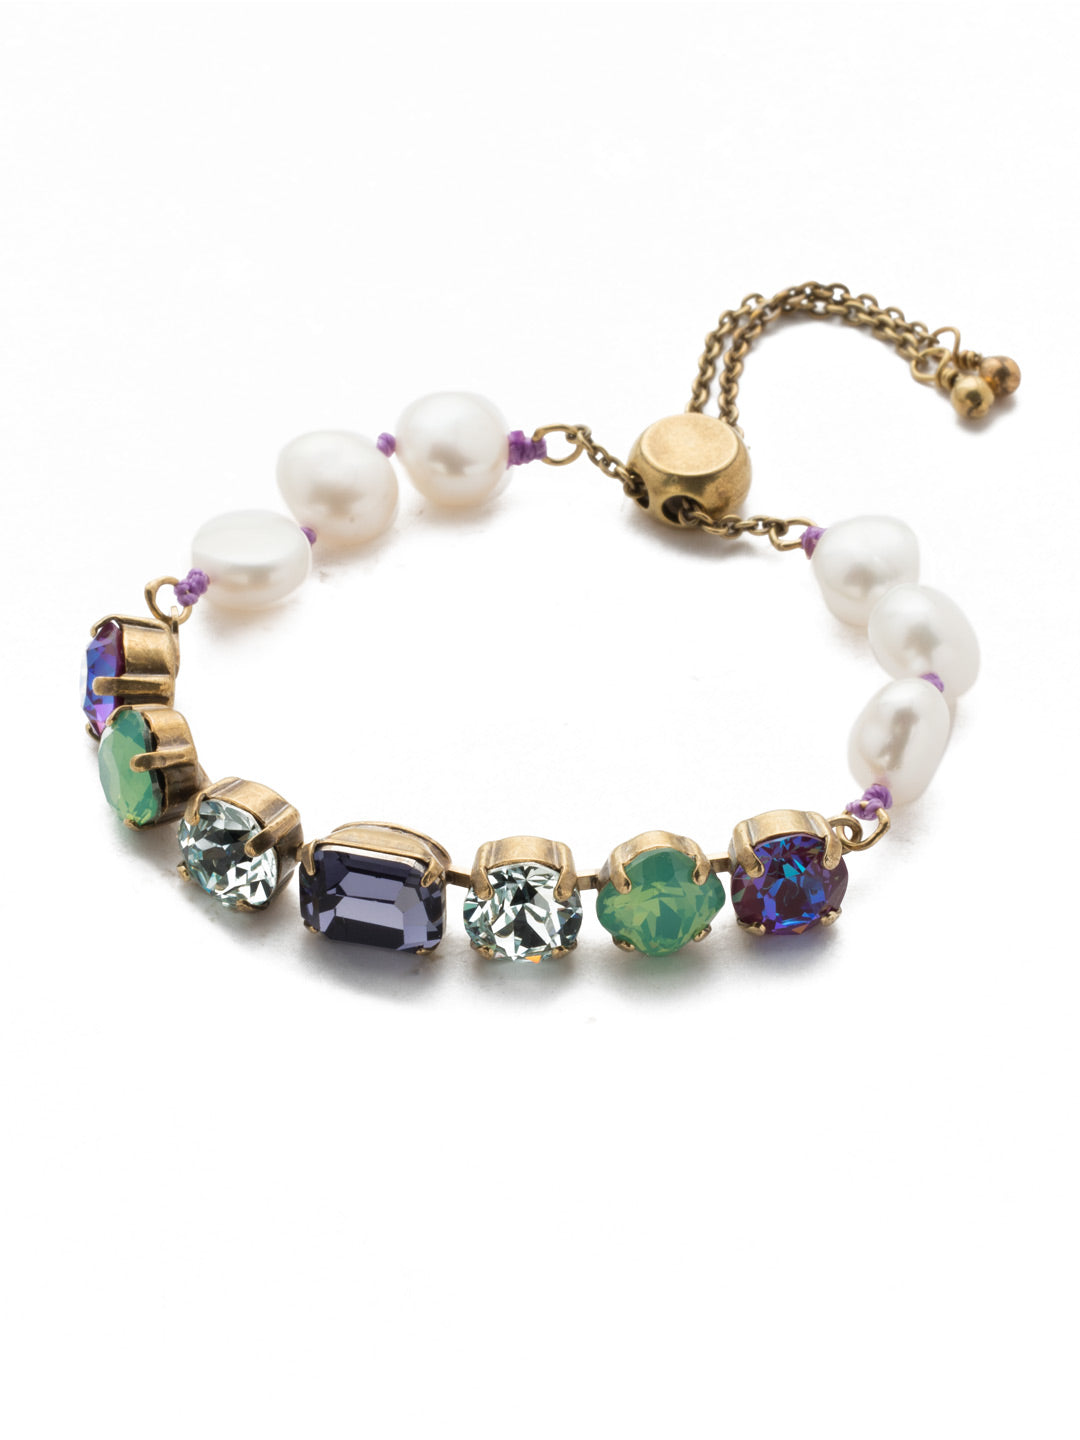 Cadenza Slider Bracelet - BEC14AGIRB - A classic line bracelet reimagined with a adjustable slider clasp. A pattern of crystals and pearls give this bracelet all around allure. From Sorrelli's Iris Bloom collection in our Antique Gold-tone finish.